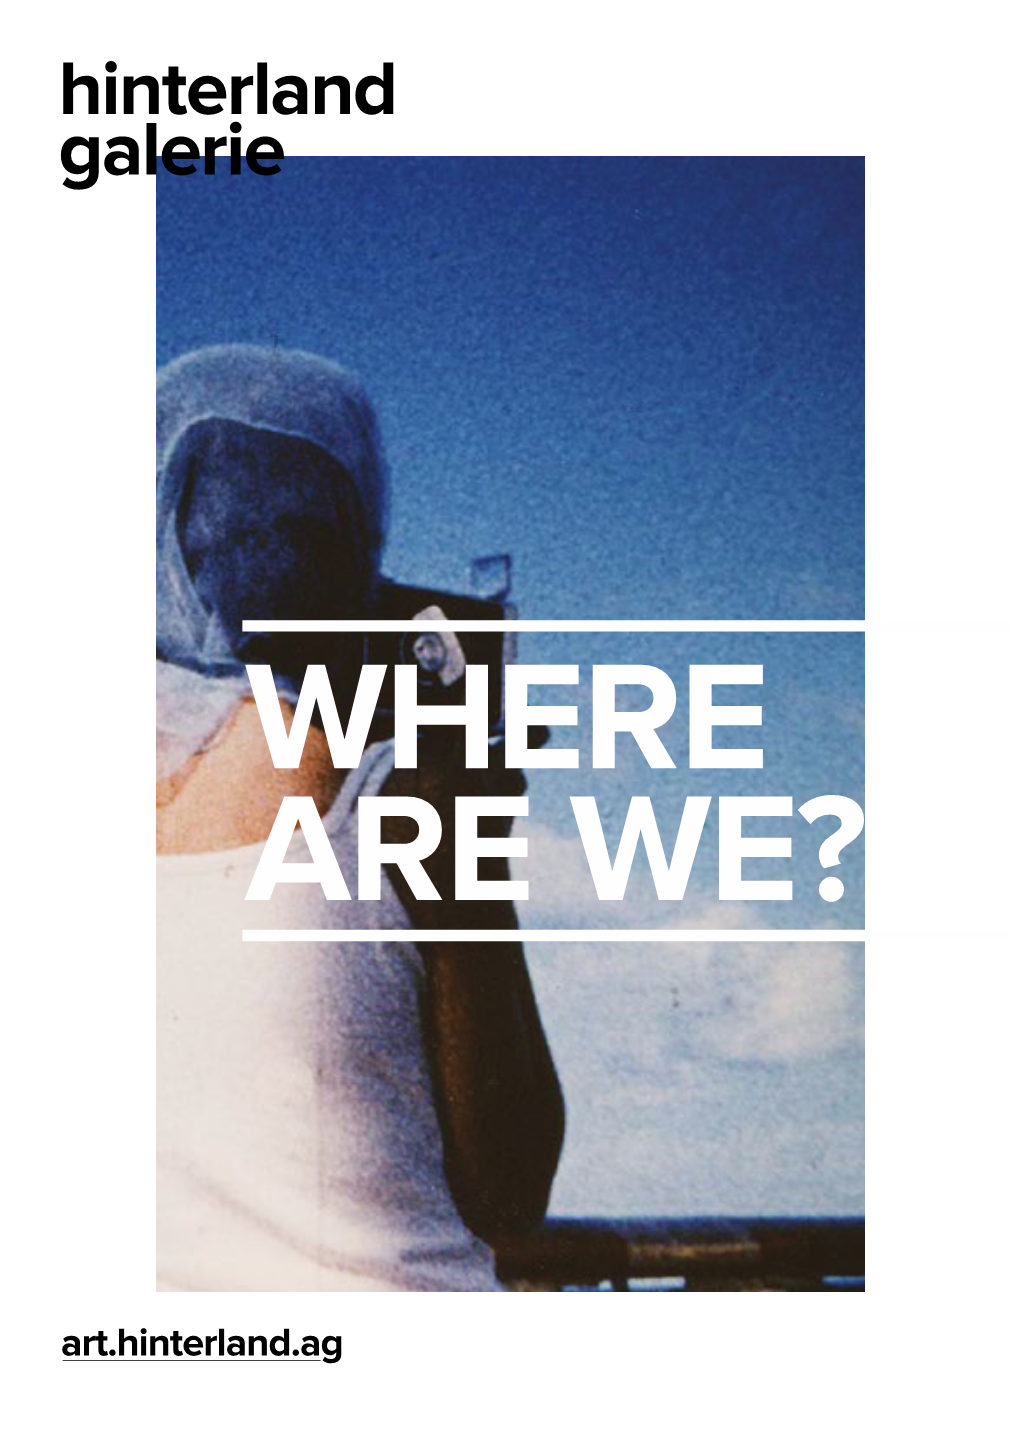 WHERE ARE WE? INTRODUCTION “Where Are We?”